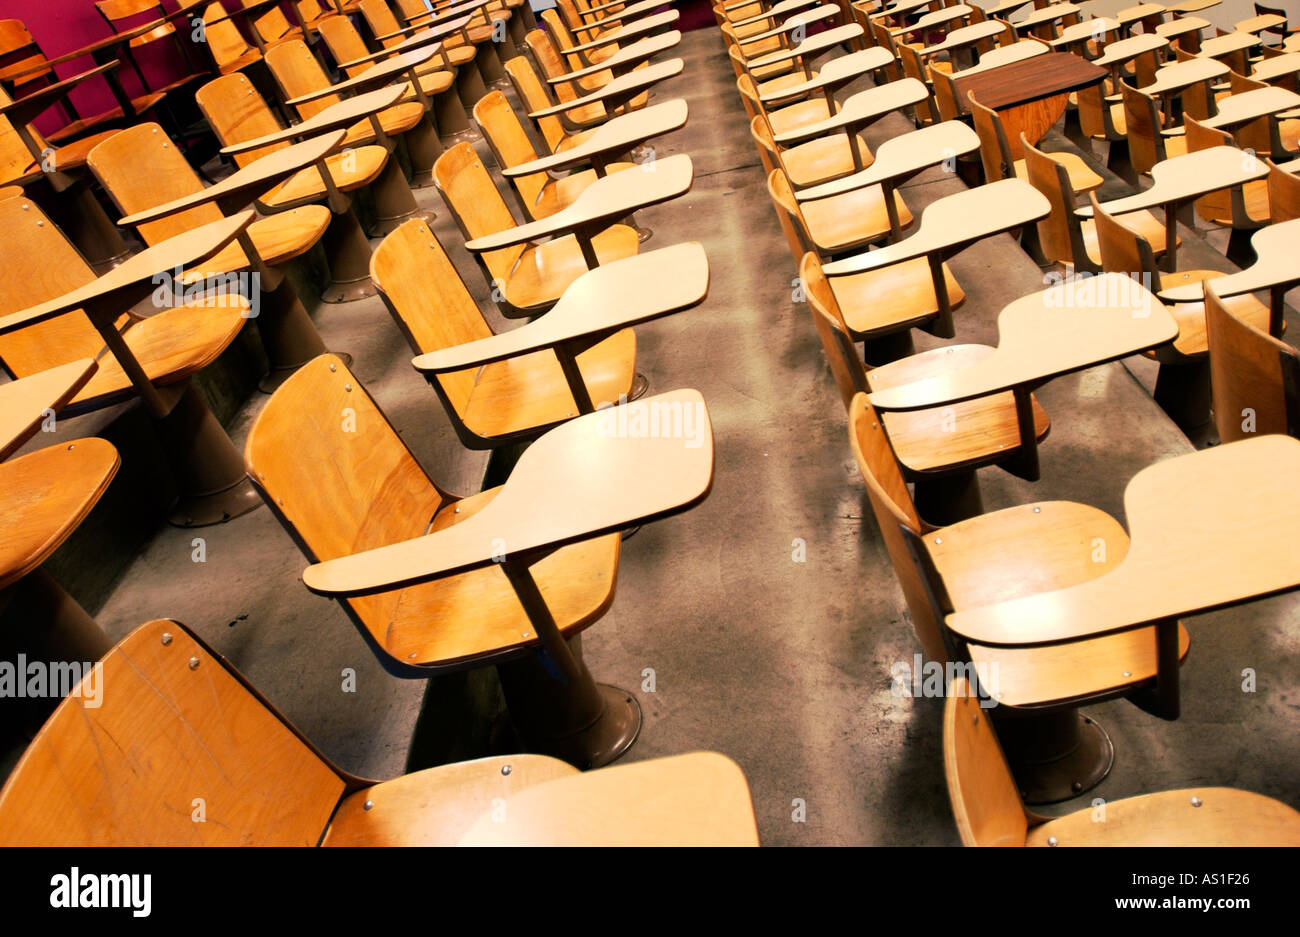 Empty College Lecture Hall Stock Photo 1580837 Alamy